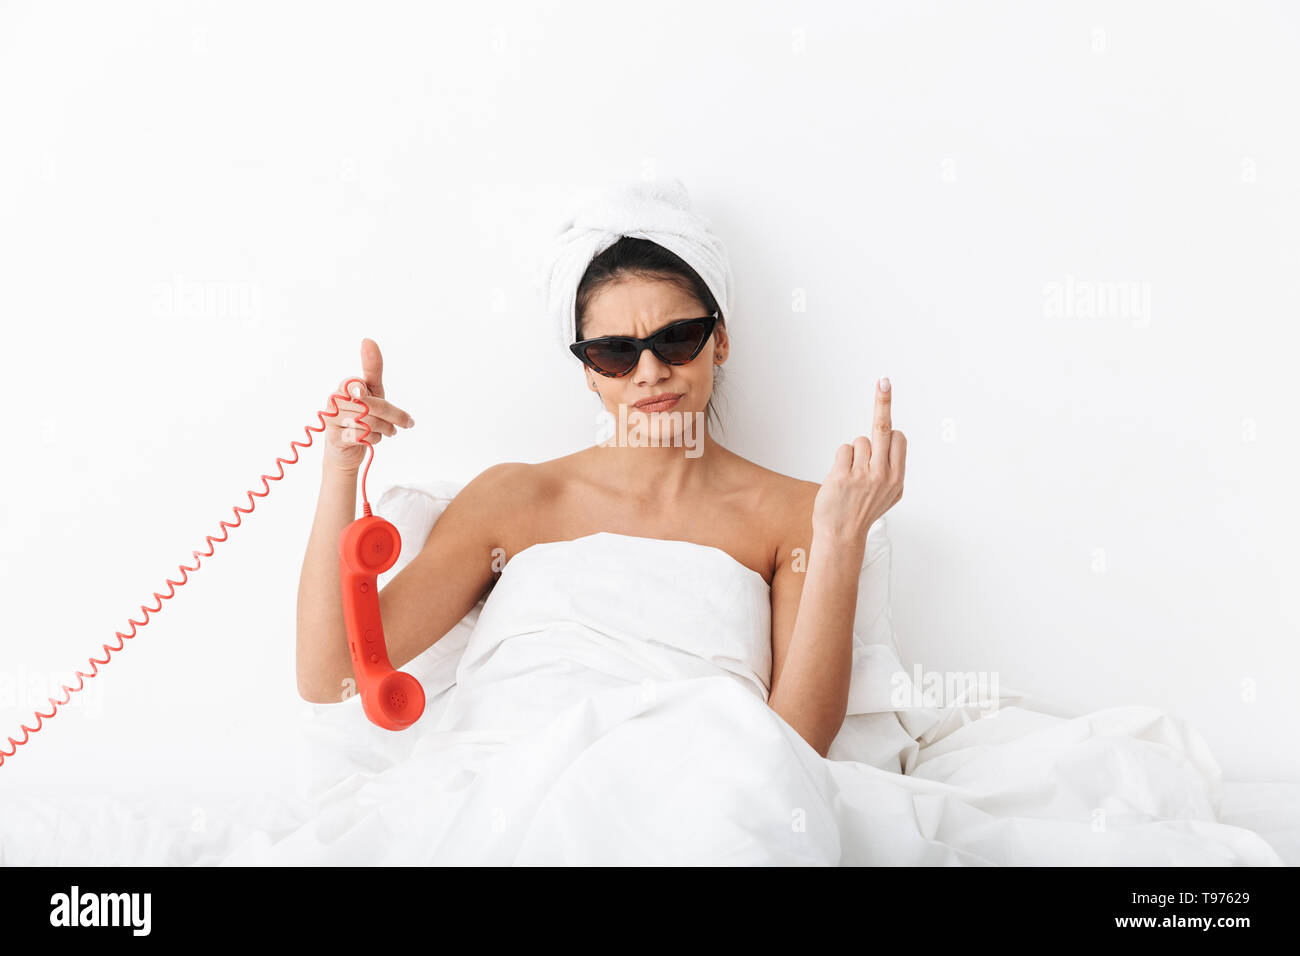 Upset young woman sitting in bed after shower wrapped in blanket, wearing sunglasses, talking on a landline phone Stock Photo